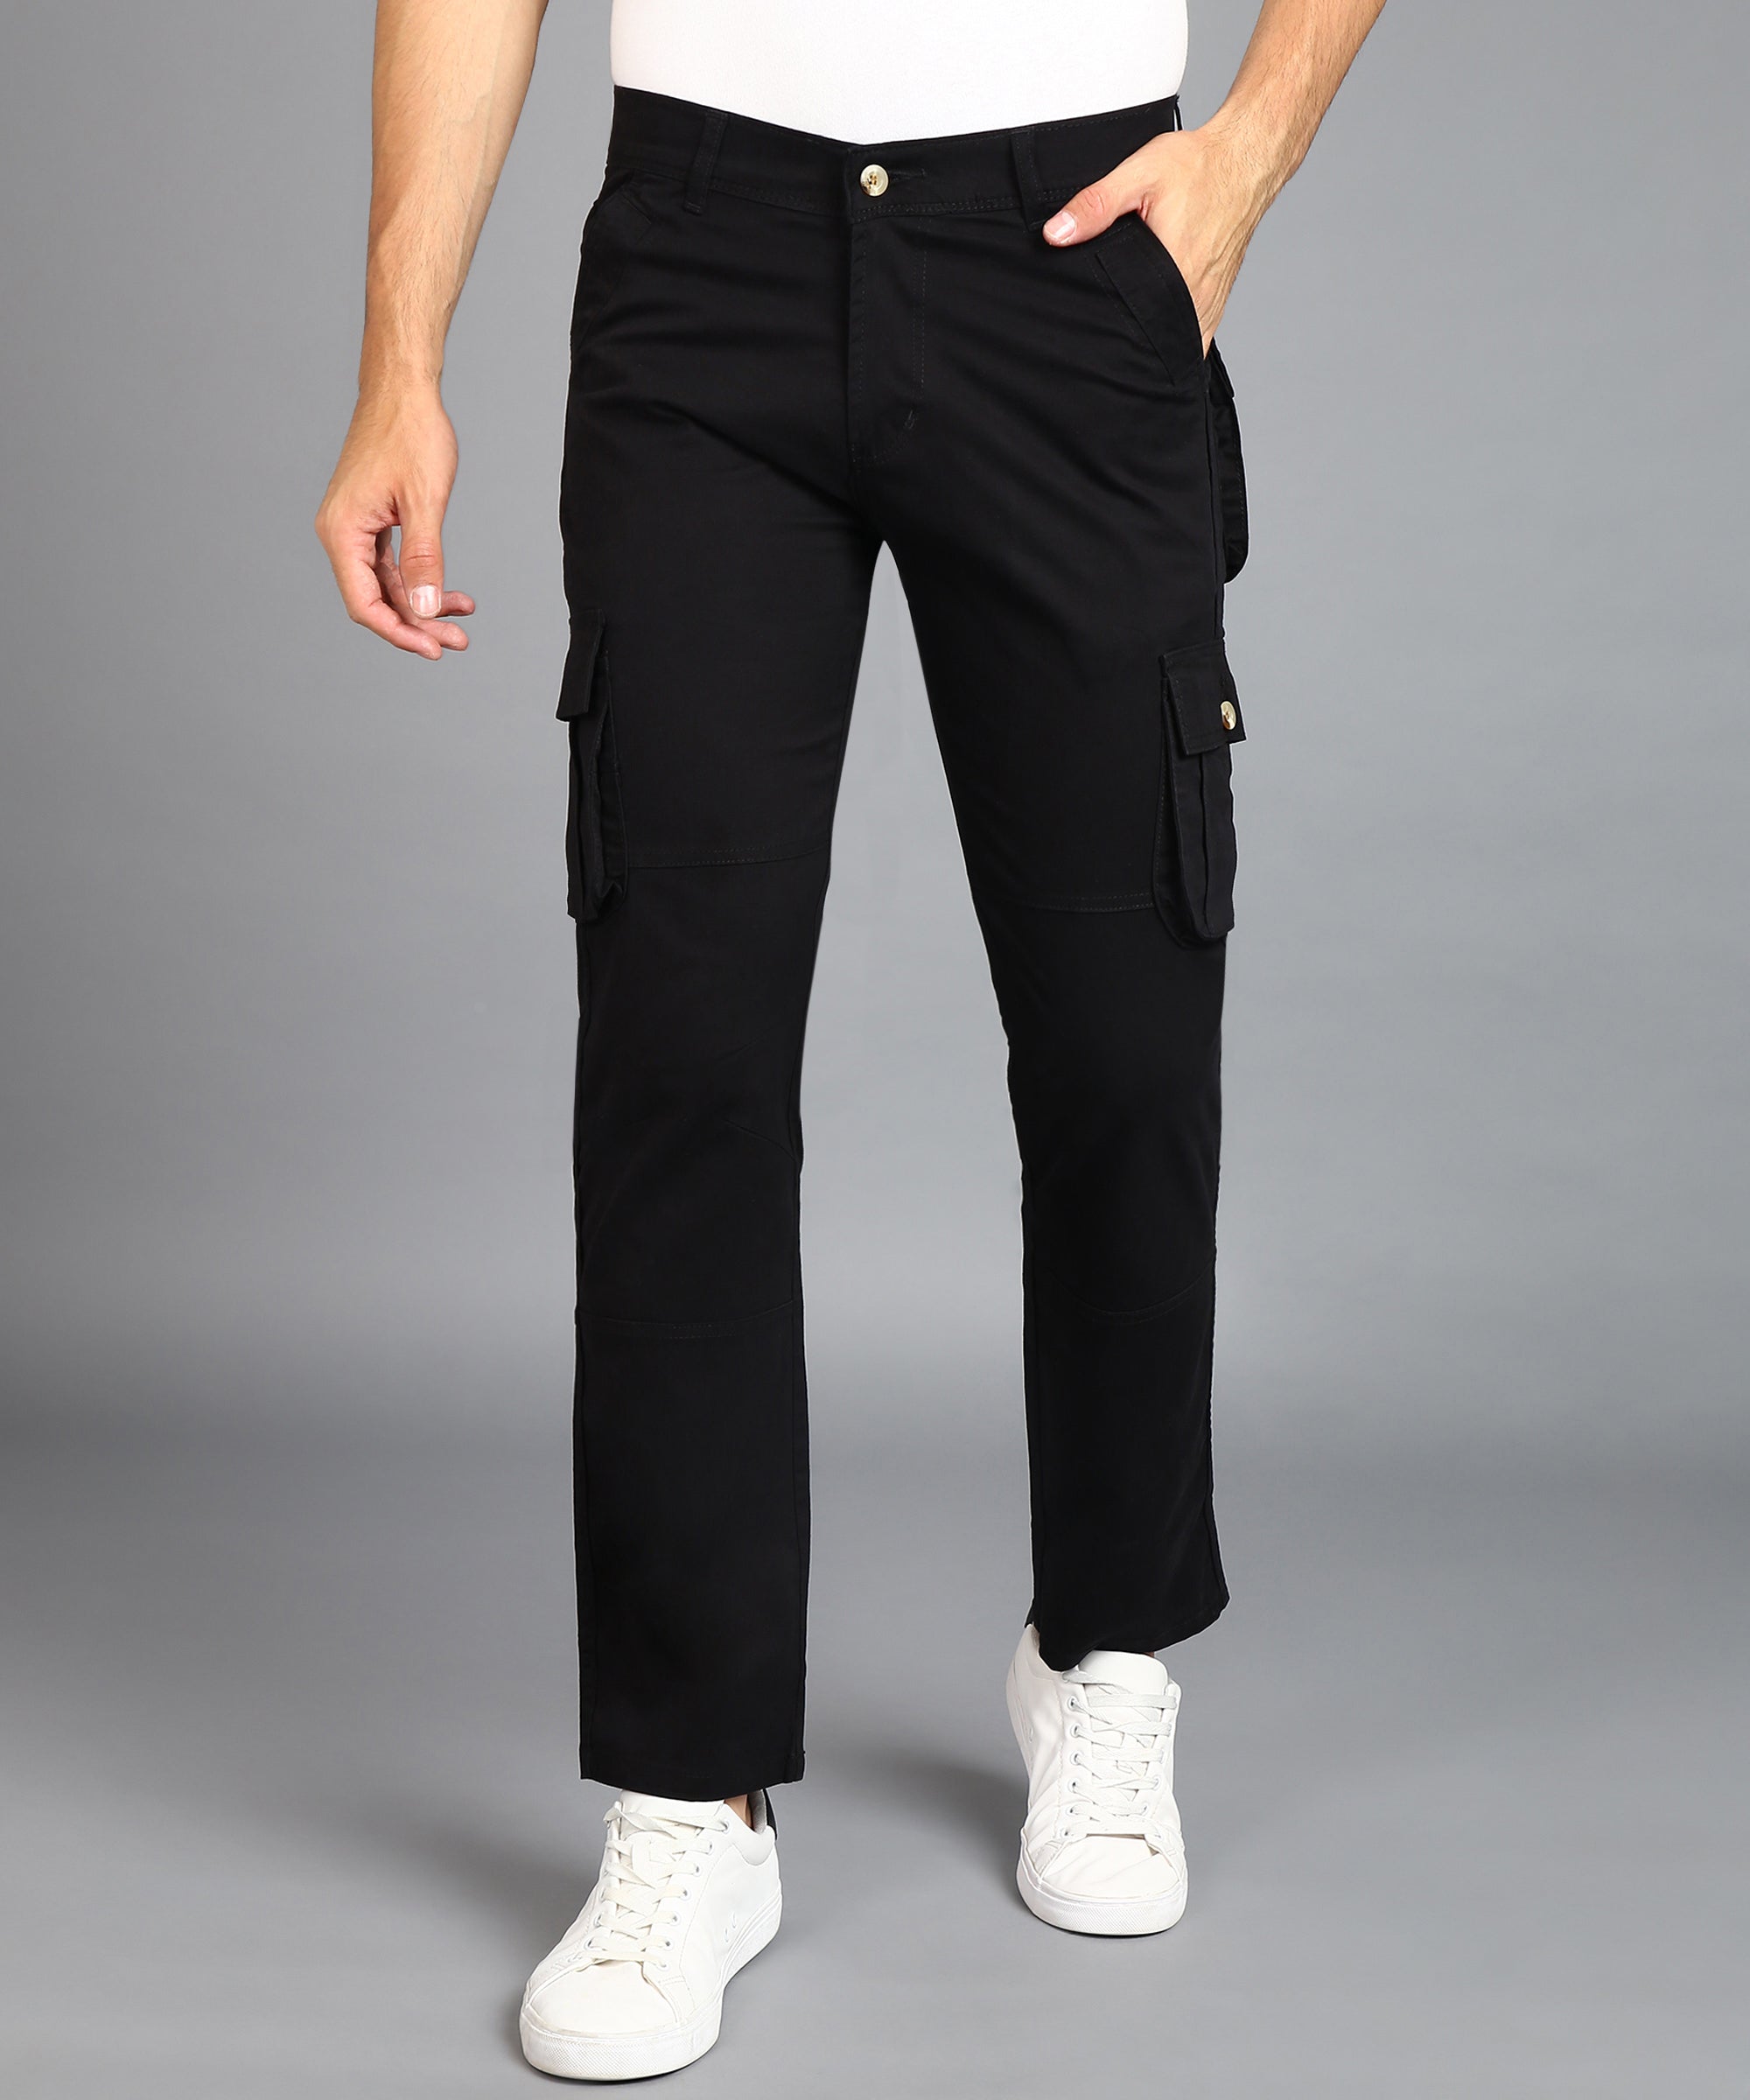 Men's Black Regular Fit Solid Cargo Chino Pant with 6 Pockets